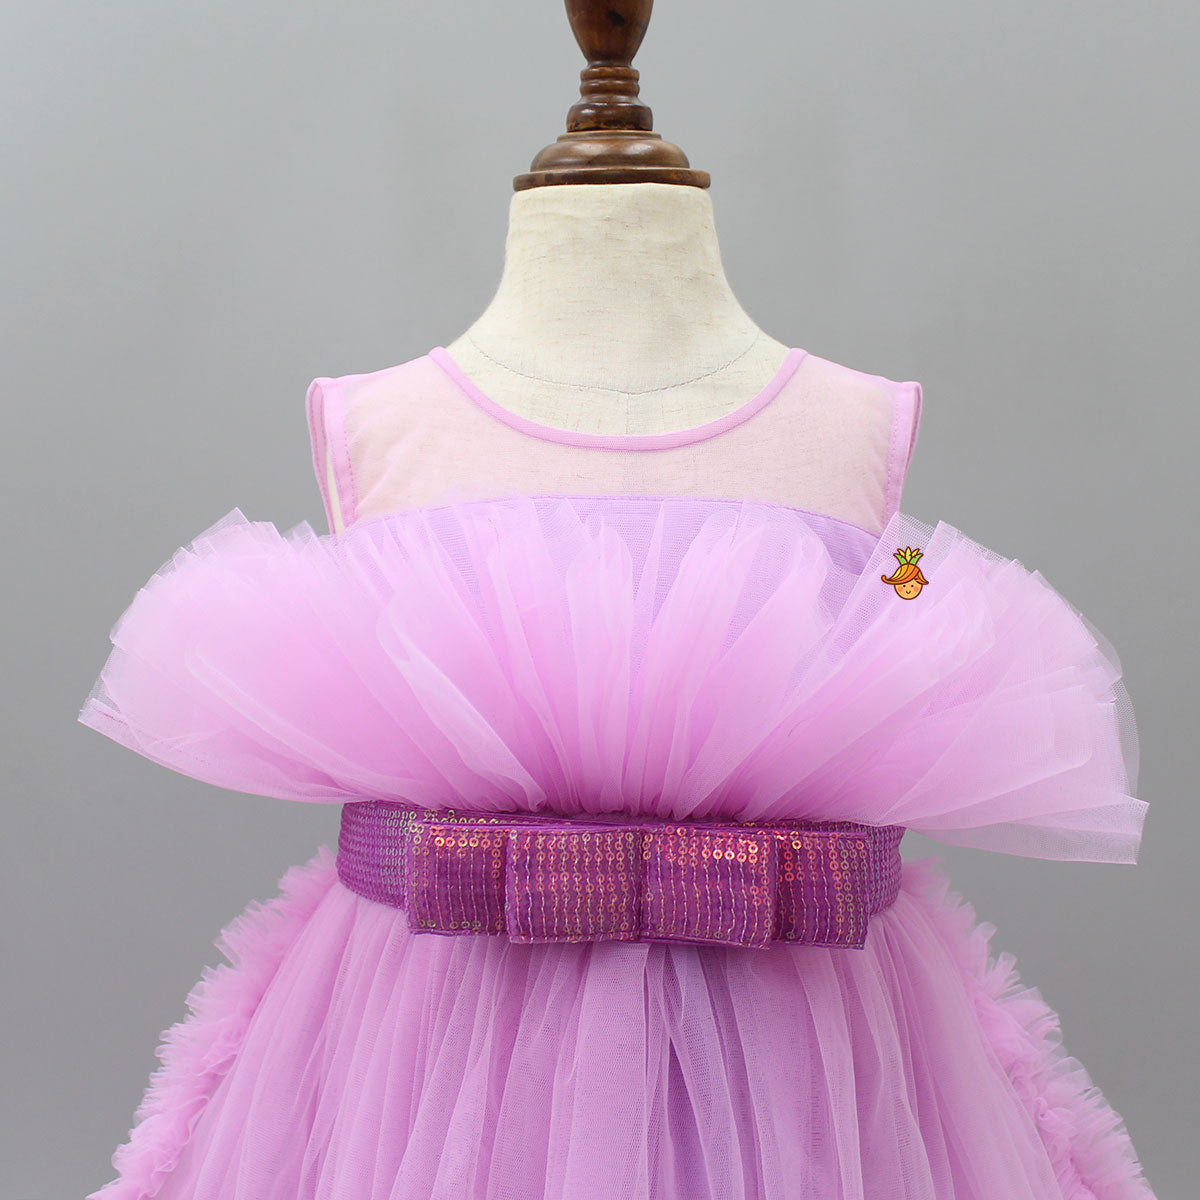 Net Ruffles Pleated Frilly Dress With Detachable Bow Belt And Trail